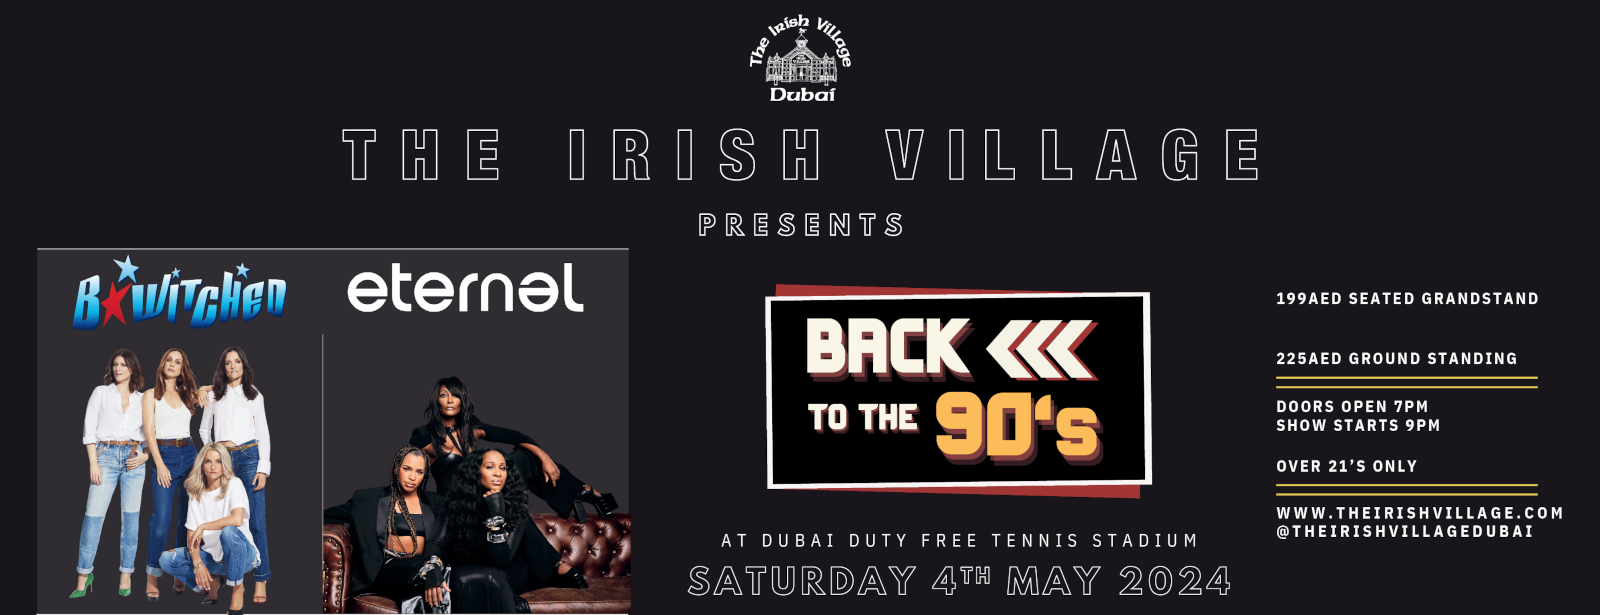 The Irish Village Presents Back to the 90's